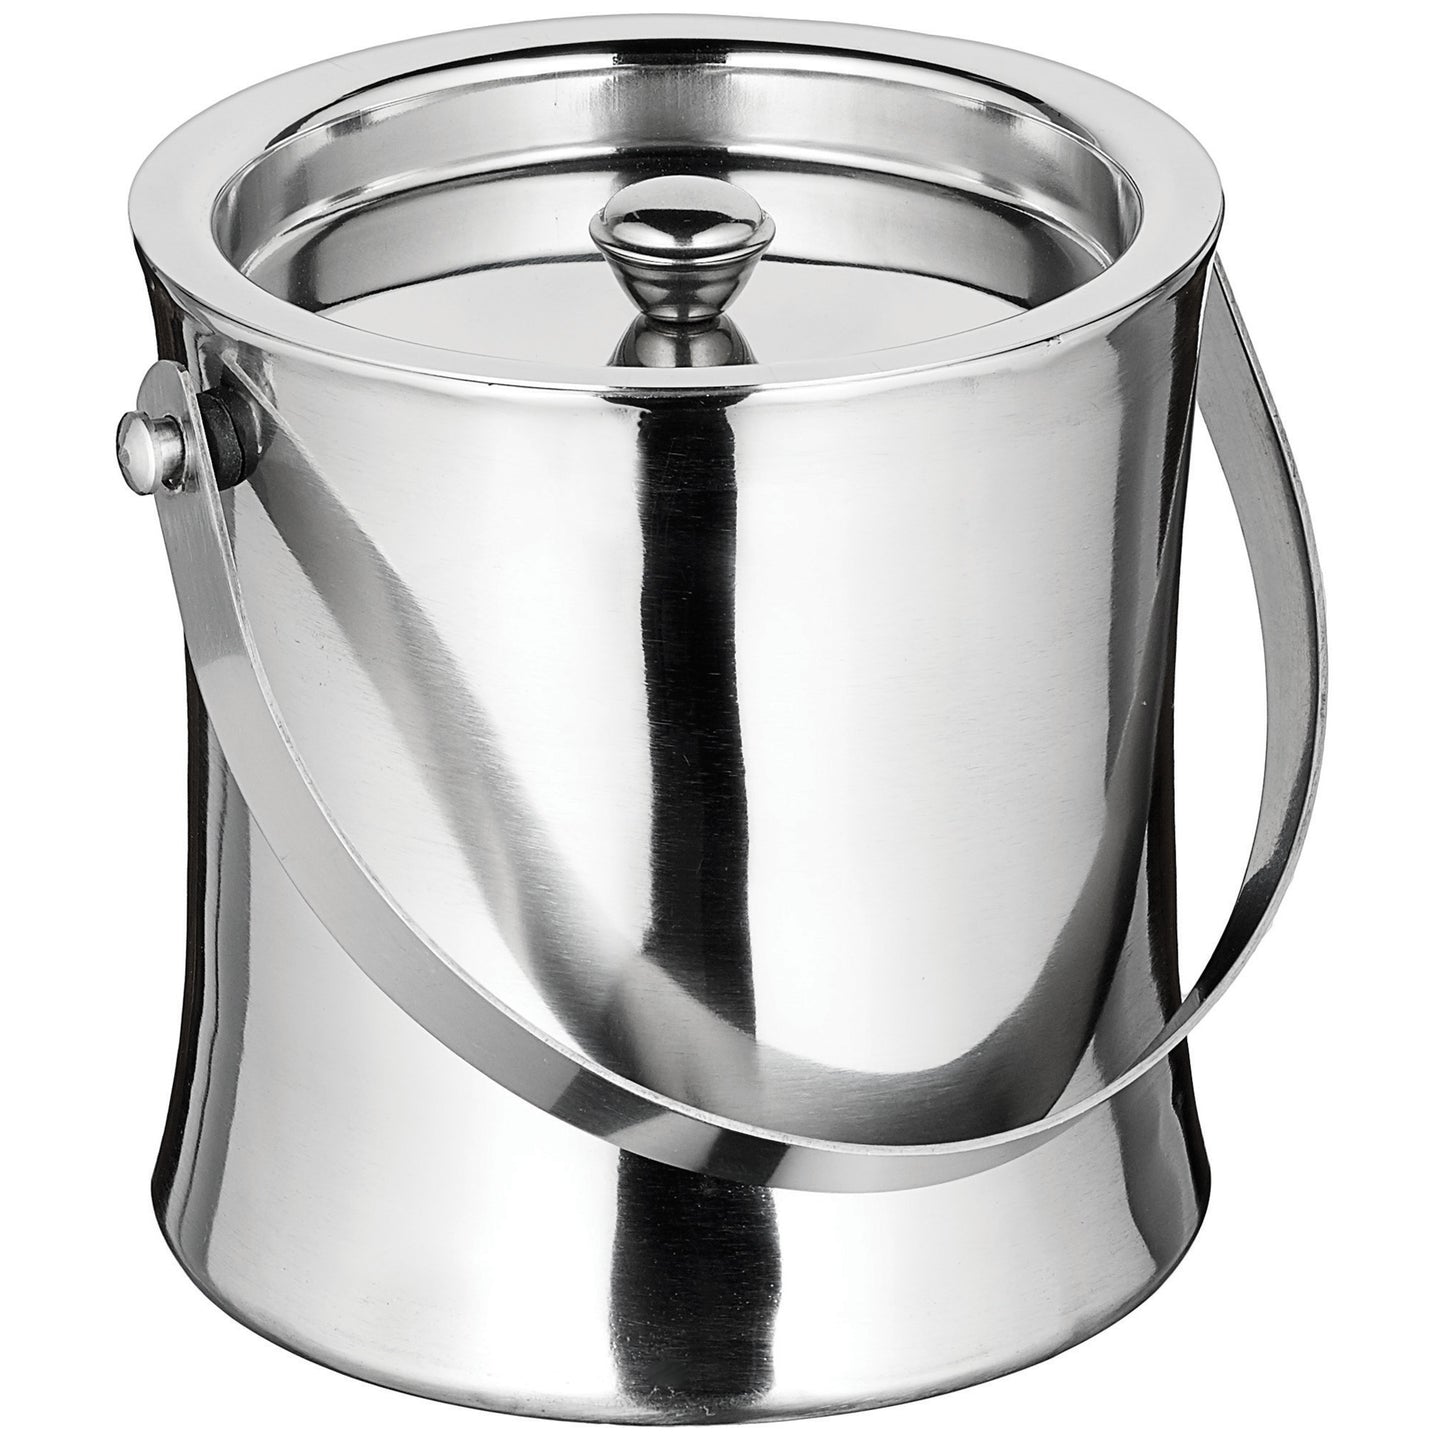 ICB-60 - Double-Wall Ice Bucket, 60 oz., Stainless Steel